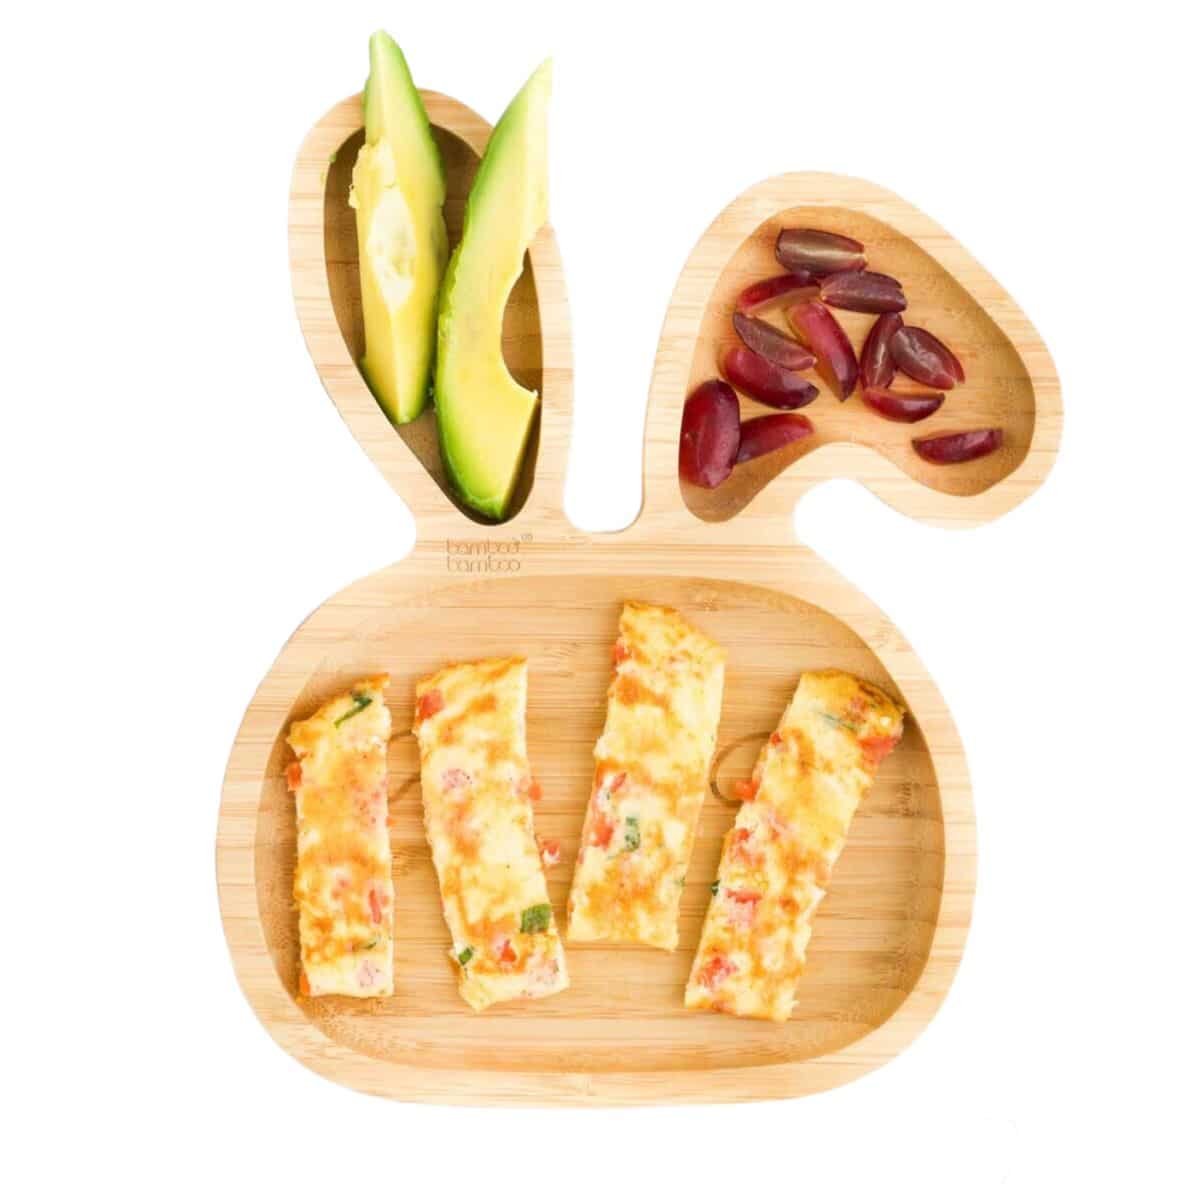 OmeletteStrips on Baby Bunny Plate Served With Avocado Fingers and Cut Grapes. 